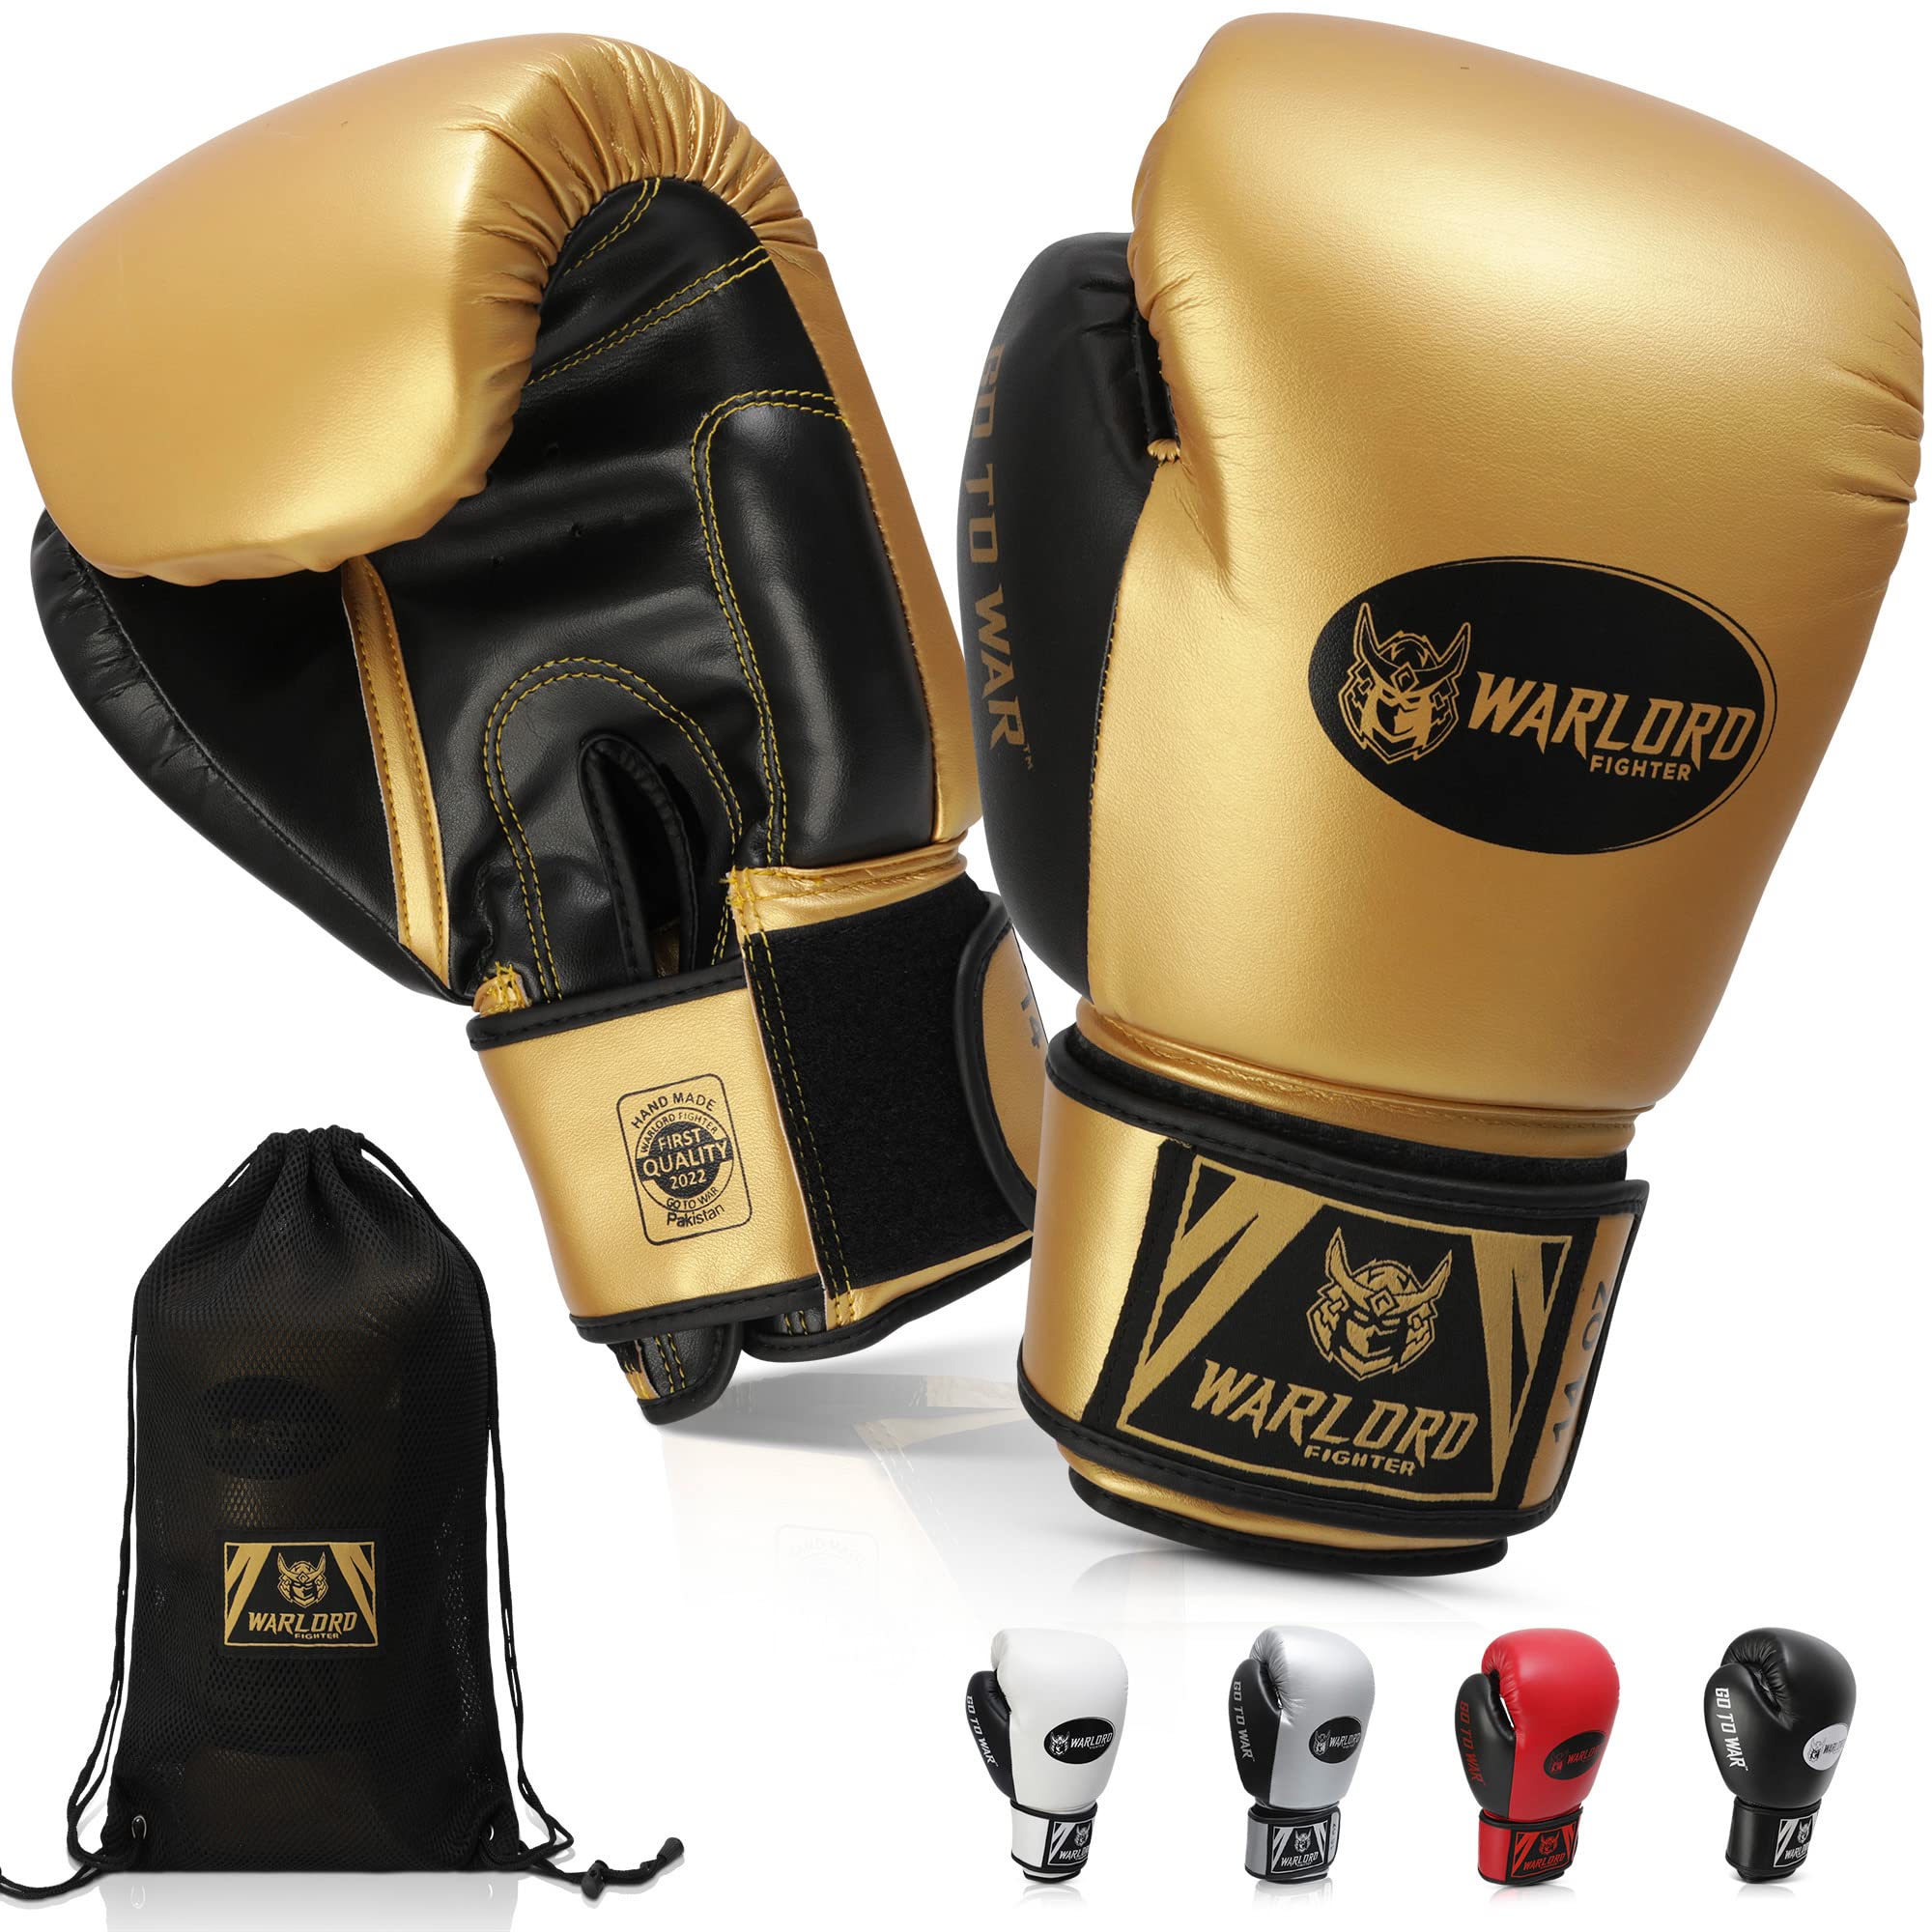 Boxing Training Gloves Sparring Muay Thai Punching Bag Mitts PU Leather